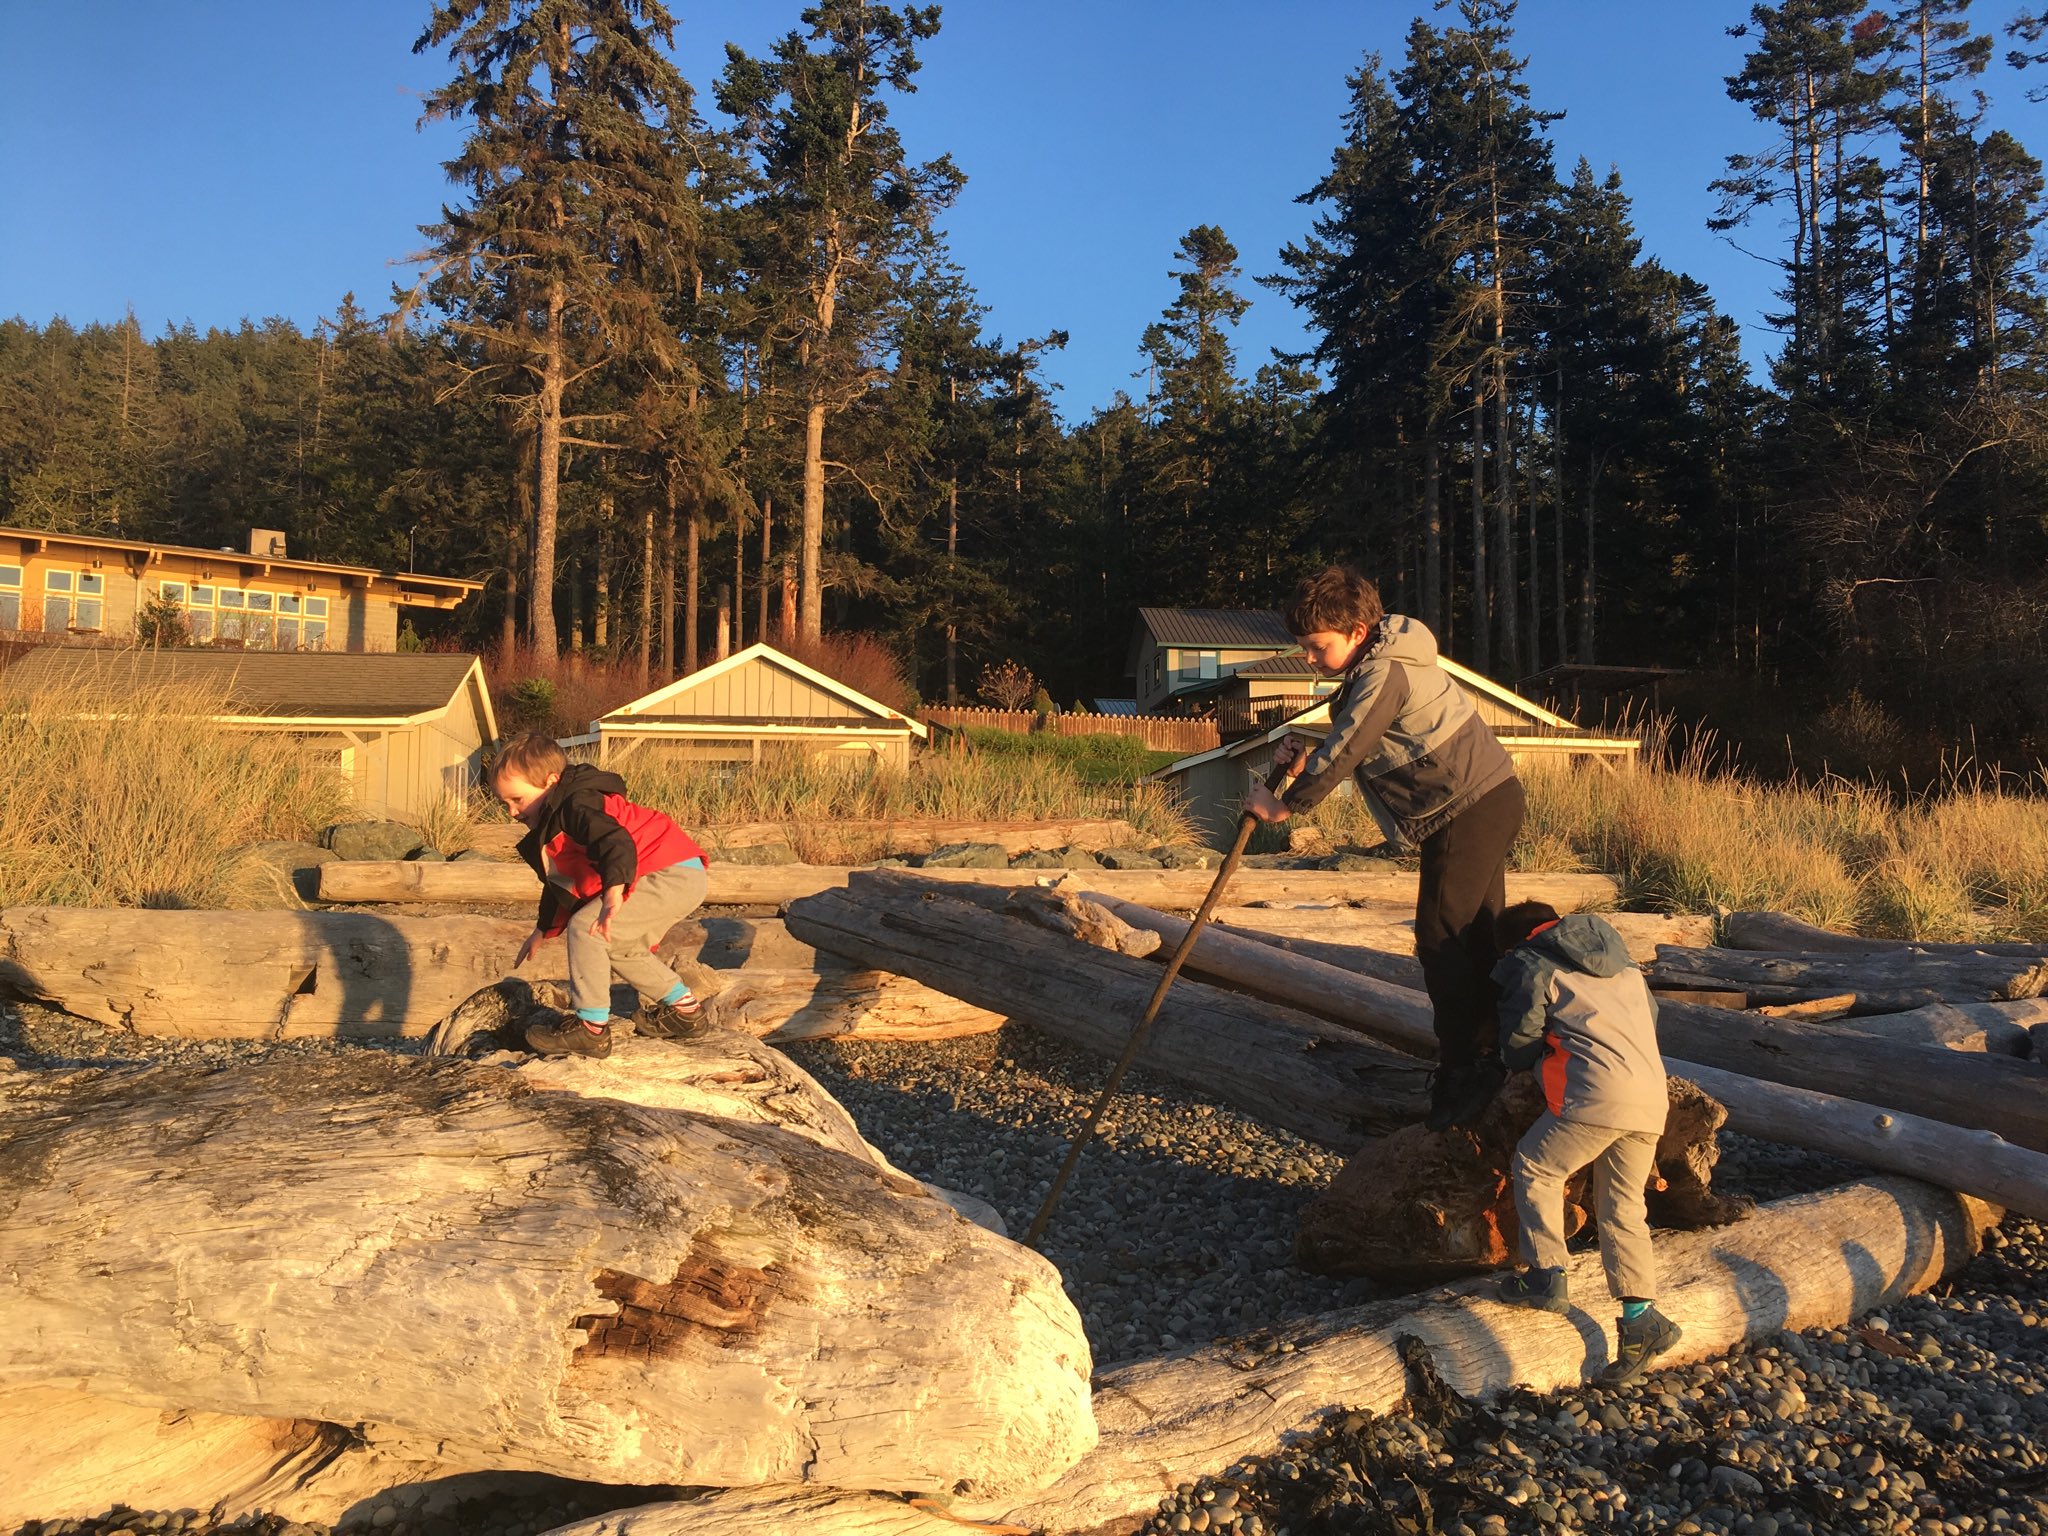 A rocky beach with very large  driftwood. Two kids are balancing on the logs.